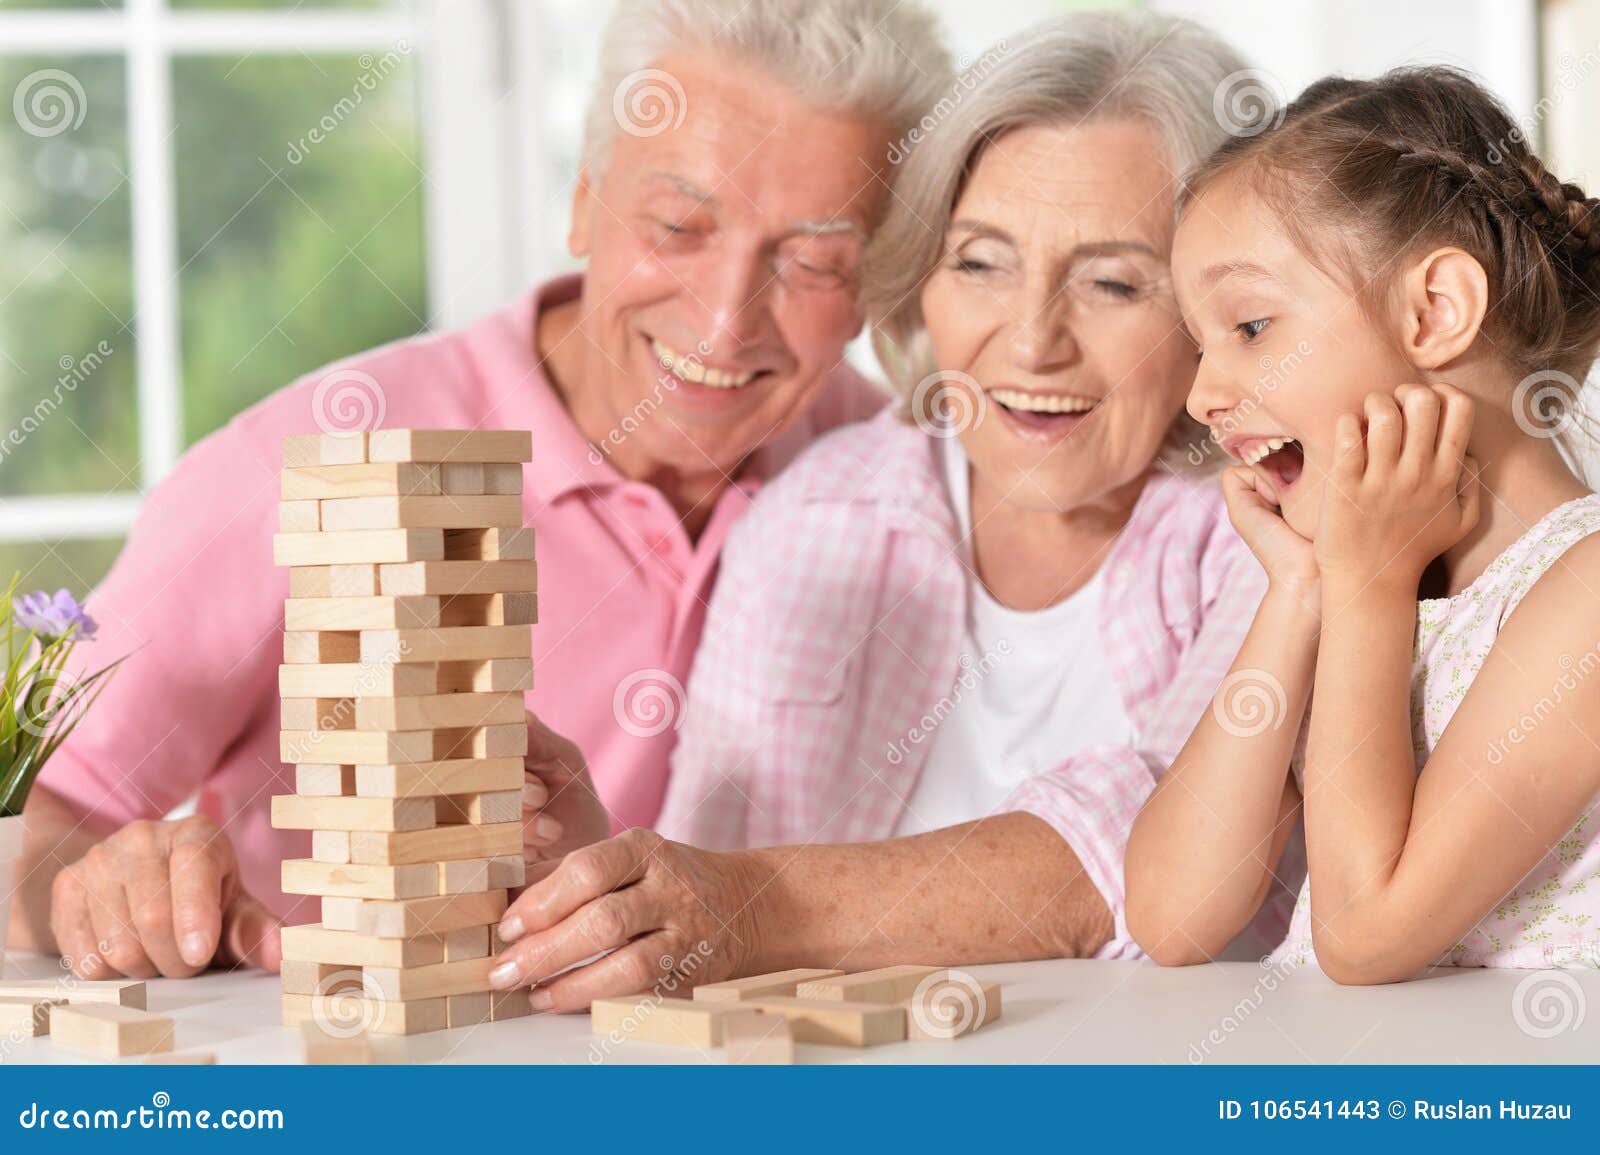 grandparents playing with her little granddaughter